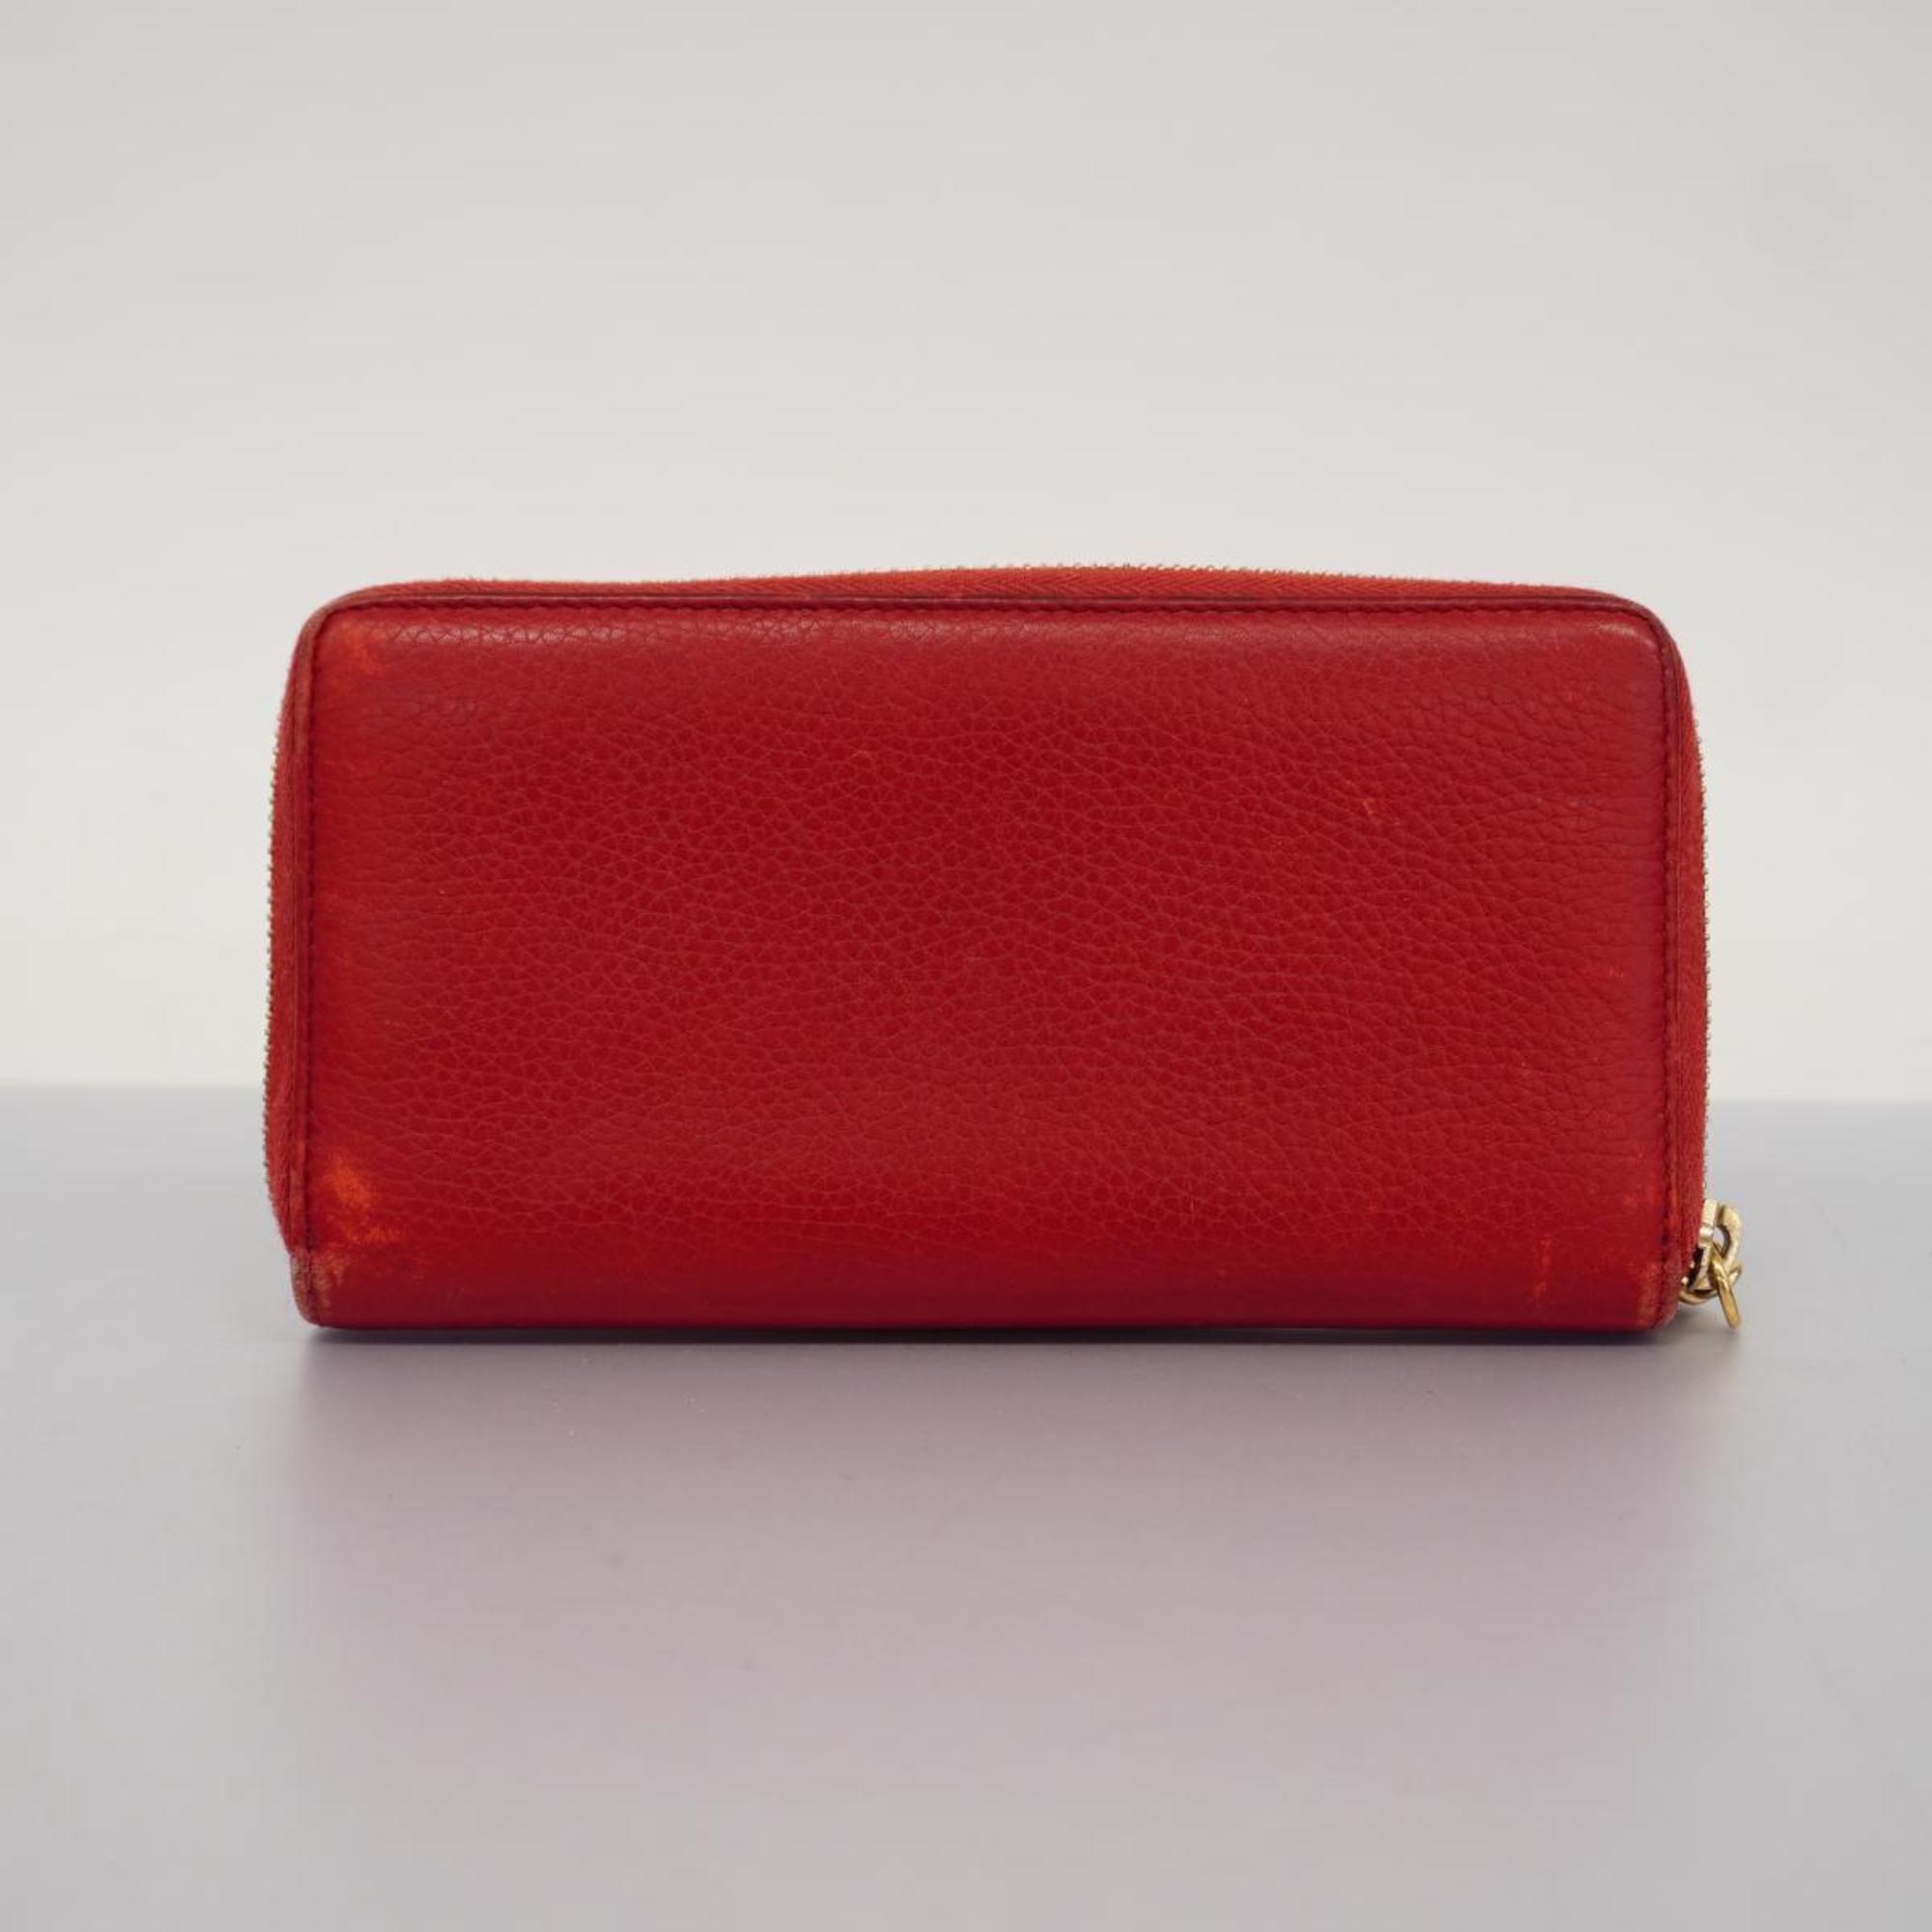 Gucci Long Wallet Soho 308004 Leather Red Champagne Women's